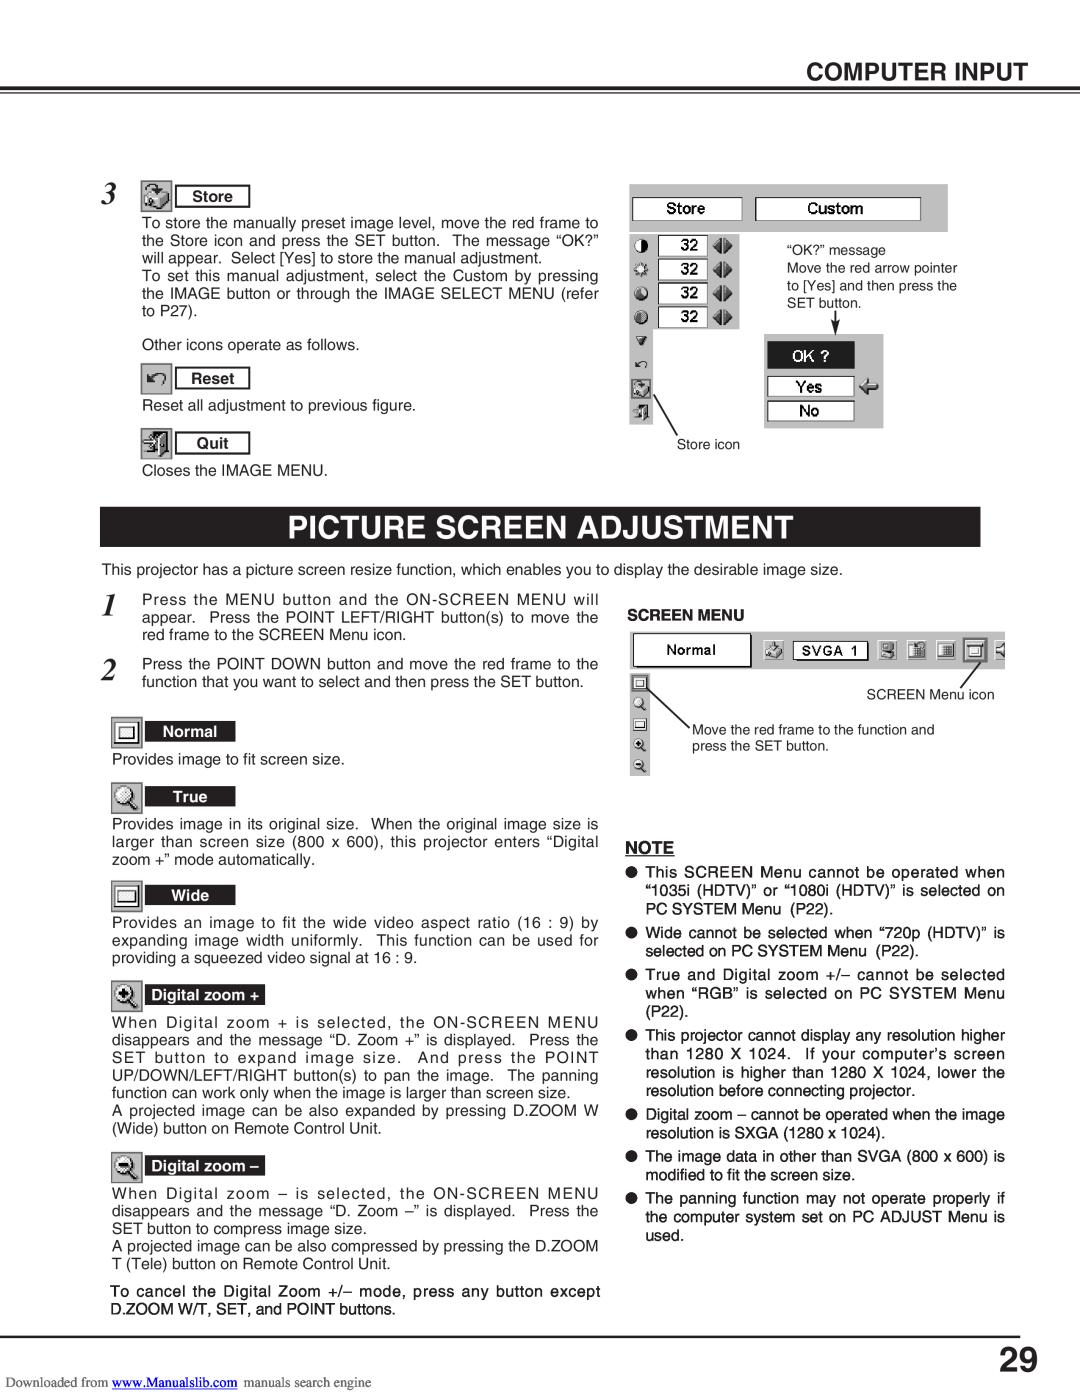 Canon LV-S2 owner manual Picture Screen Adjustment, Computer Input, Store, Reset, Quit, Screen Menu 